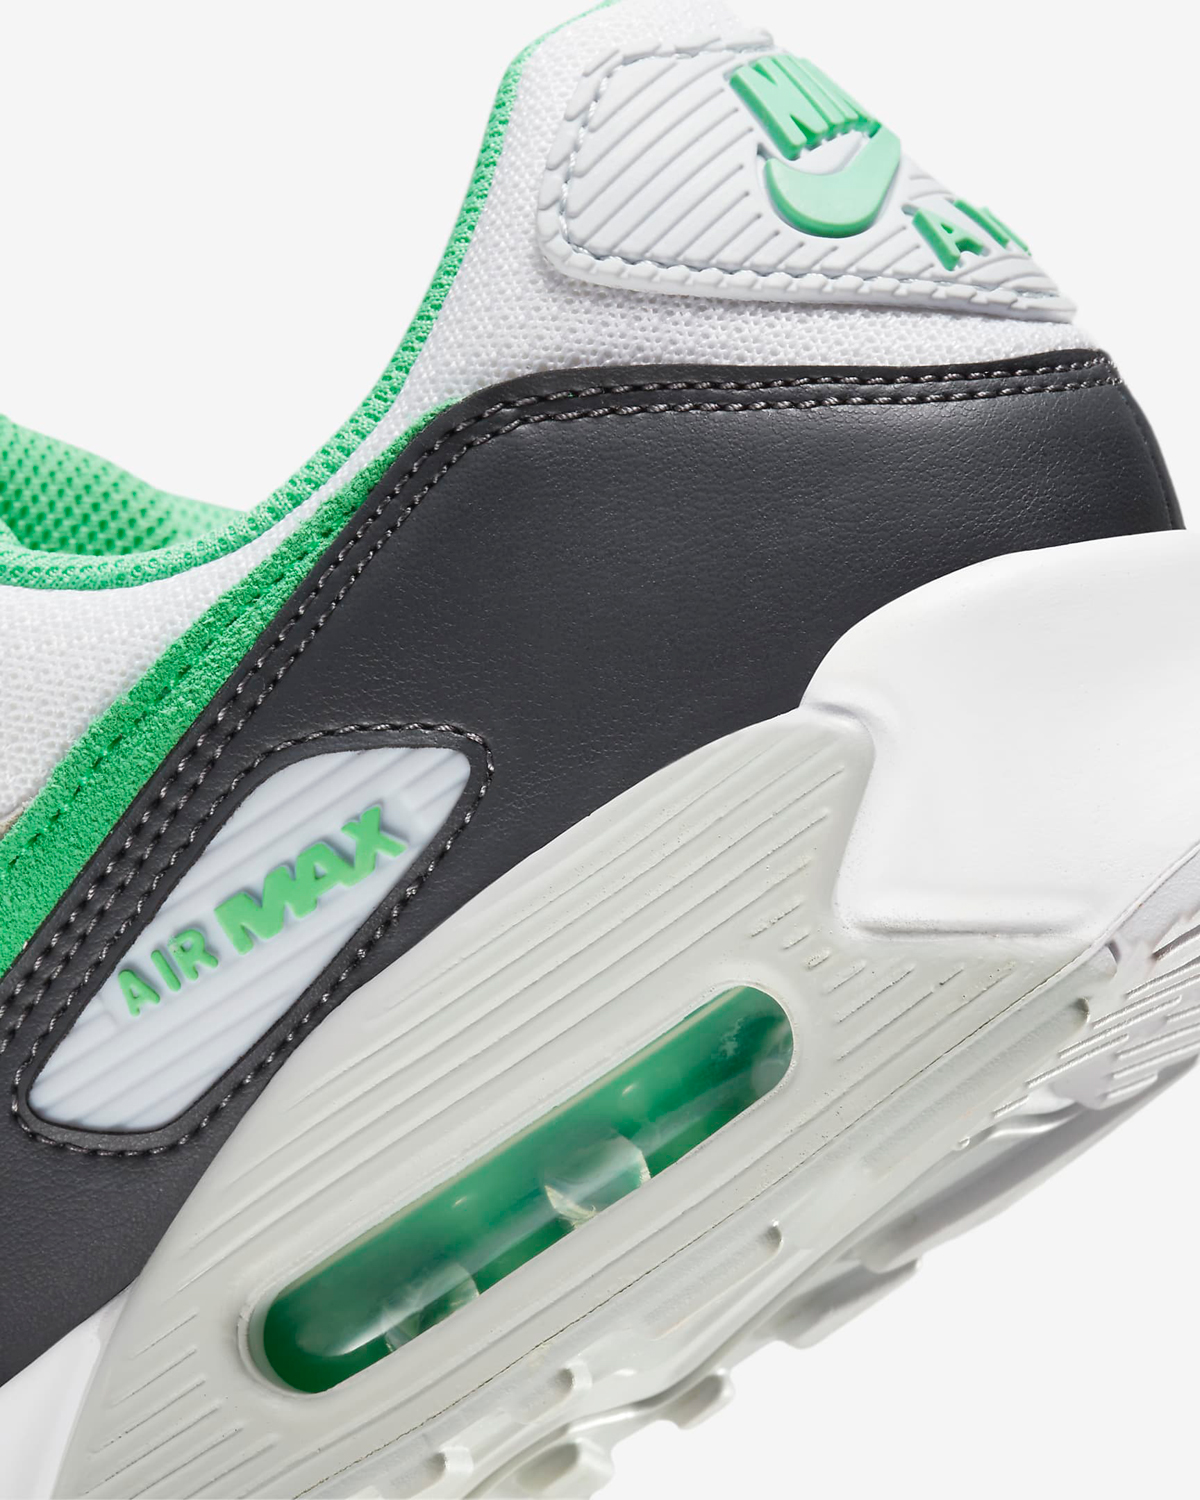 Nike-Air-Max-90-Lucky-Green-Release-Date-Info-8